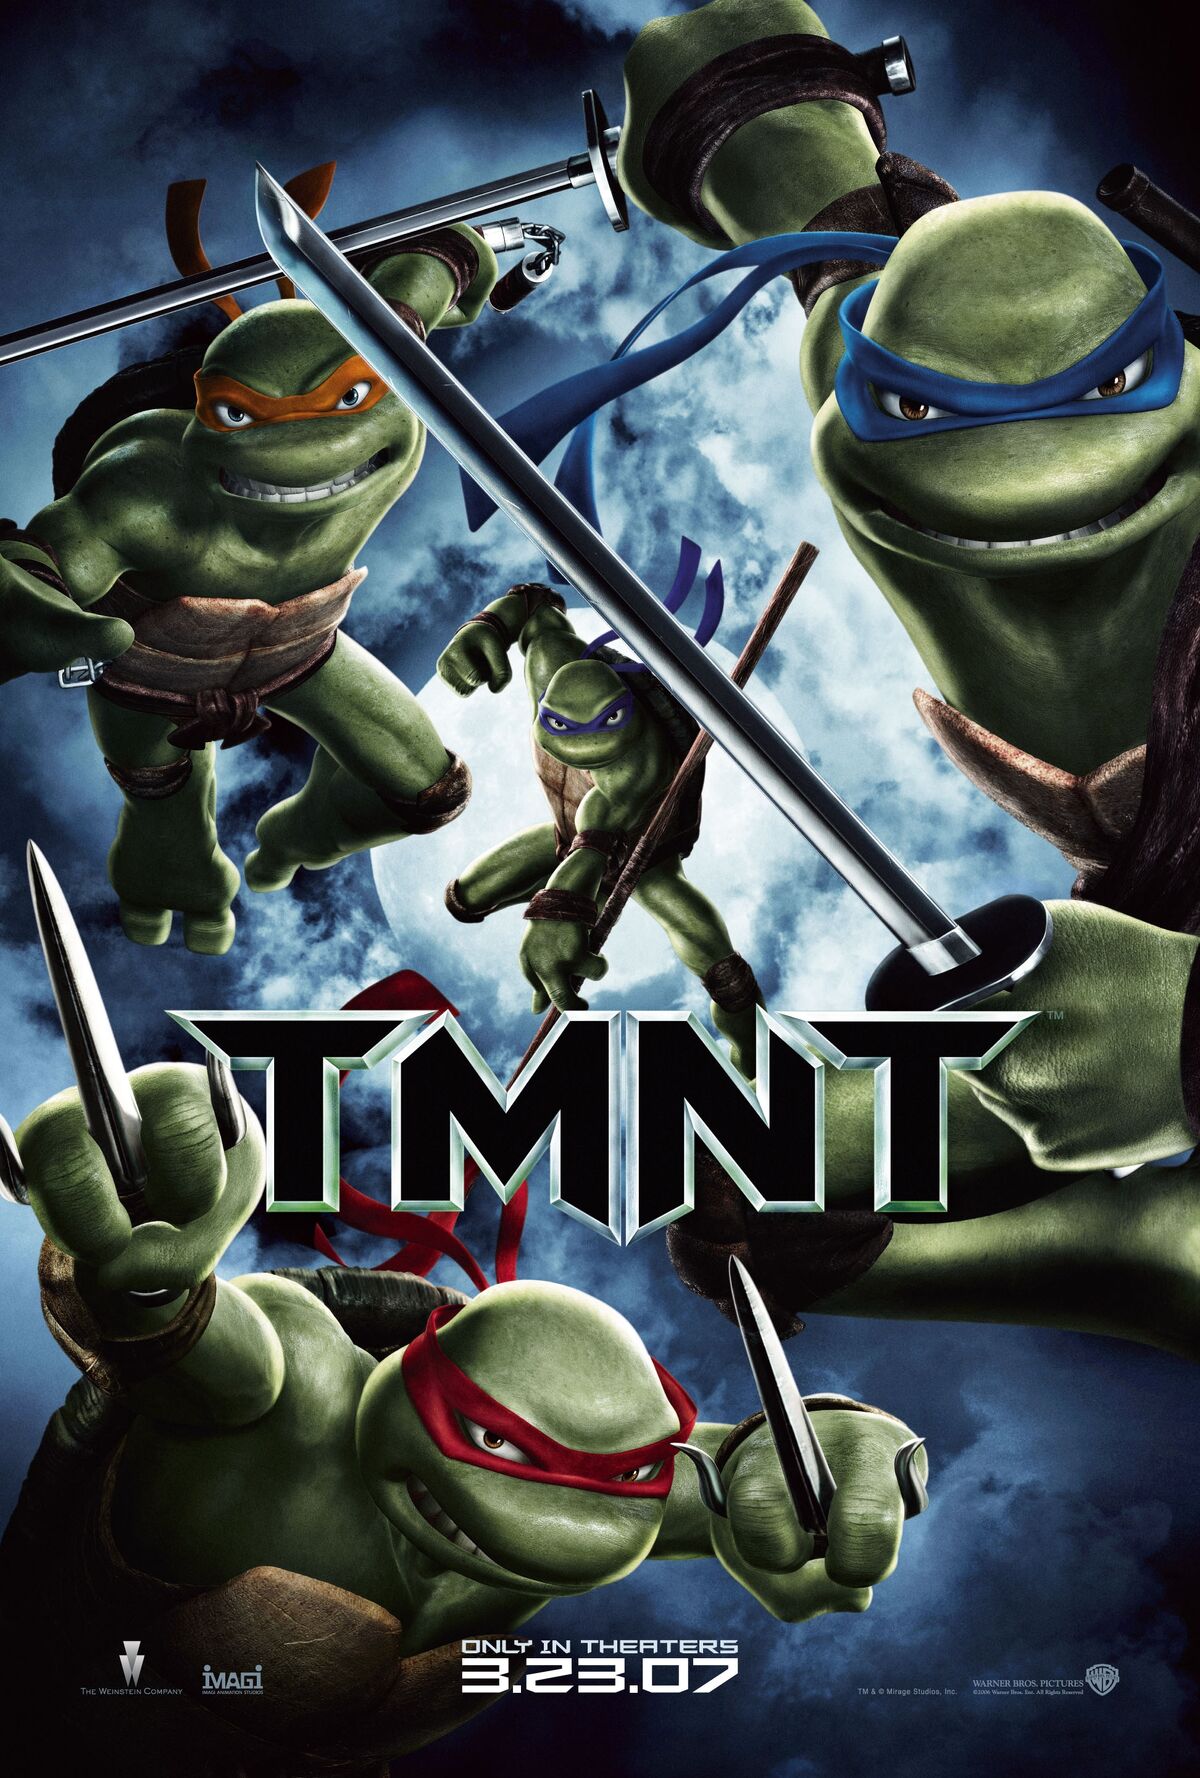 https://static.wikia.nocookie.net/tmnt/images/a/ac/TMNTposterA.jpg/revision/latest/scale-to-width-down/1200?cb=20150403225353